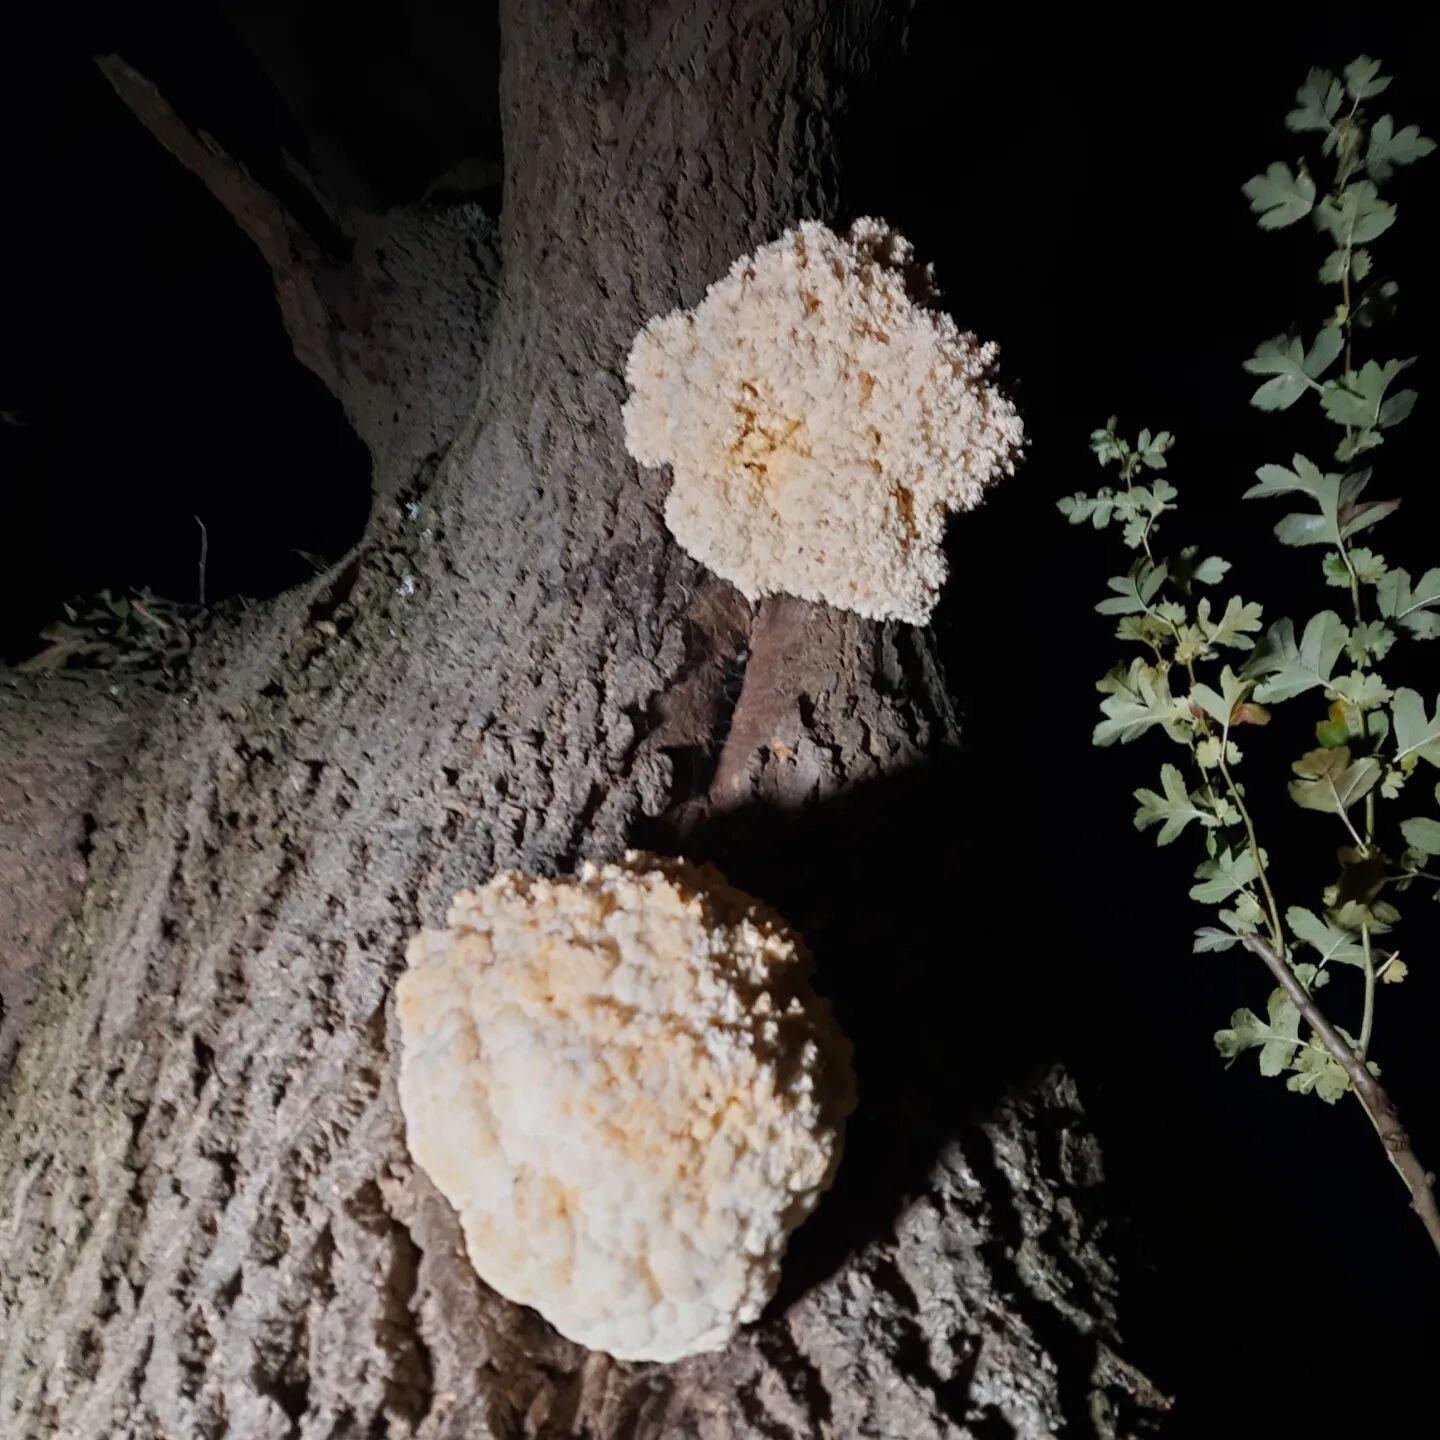 A trip up to Leicestershire last night to take a sample of the incredibly rare Hericium coralloides, or Coral tooth fungus.
There were three football size fruiting bodies high up in a dying Ash tree. This fungus has been fruiting yearly for 30+ years